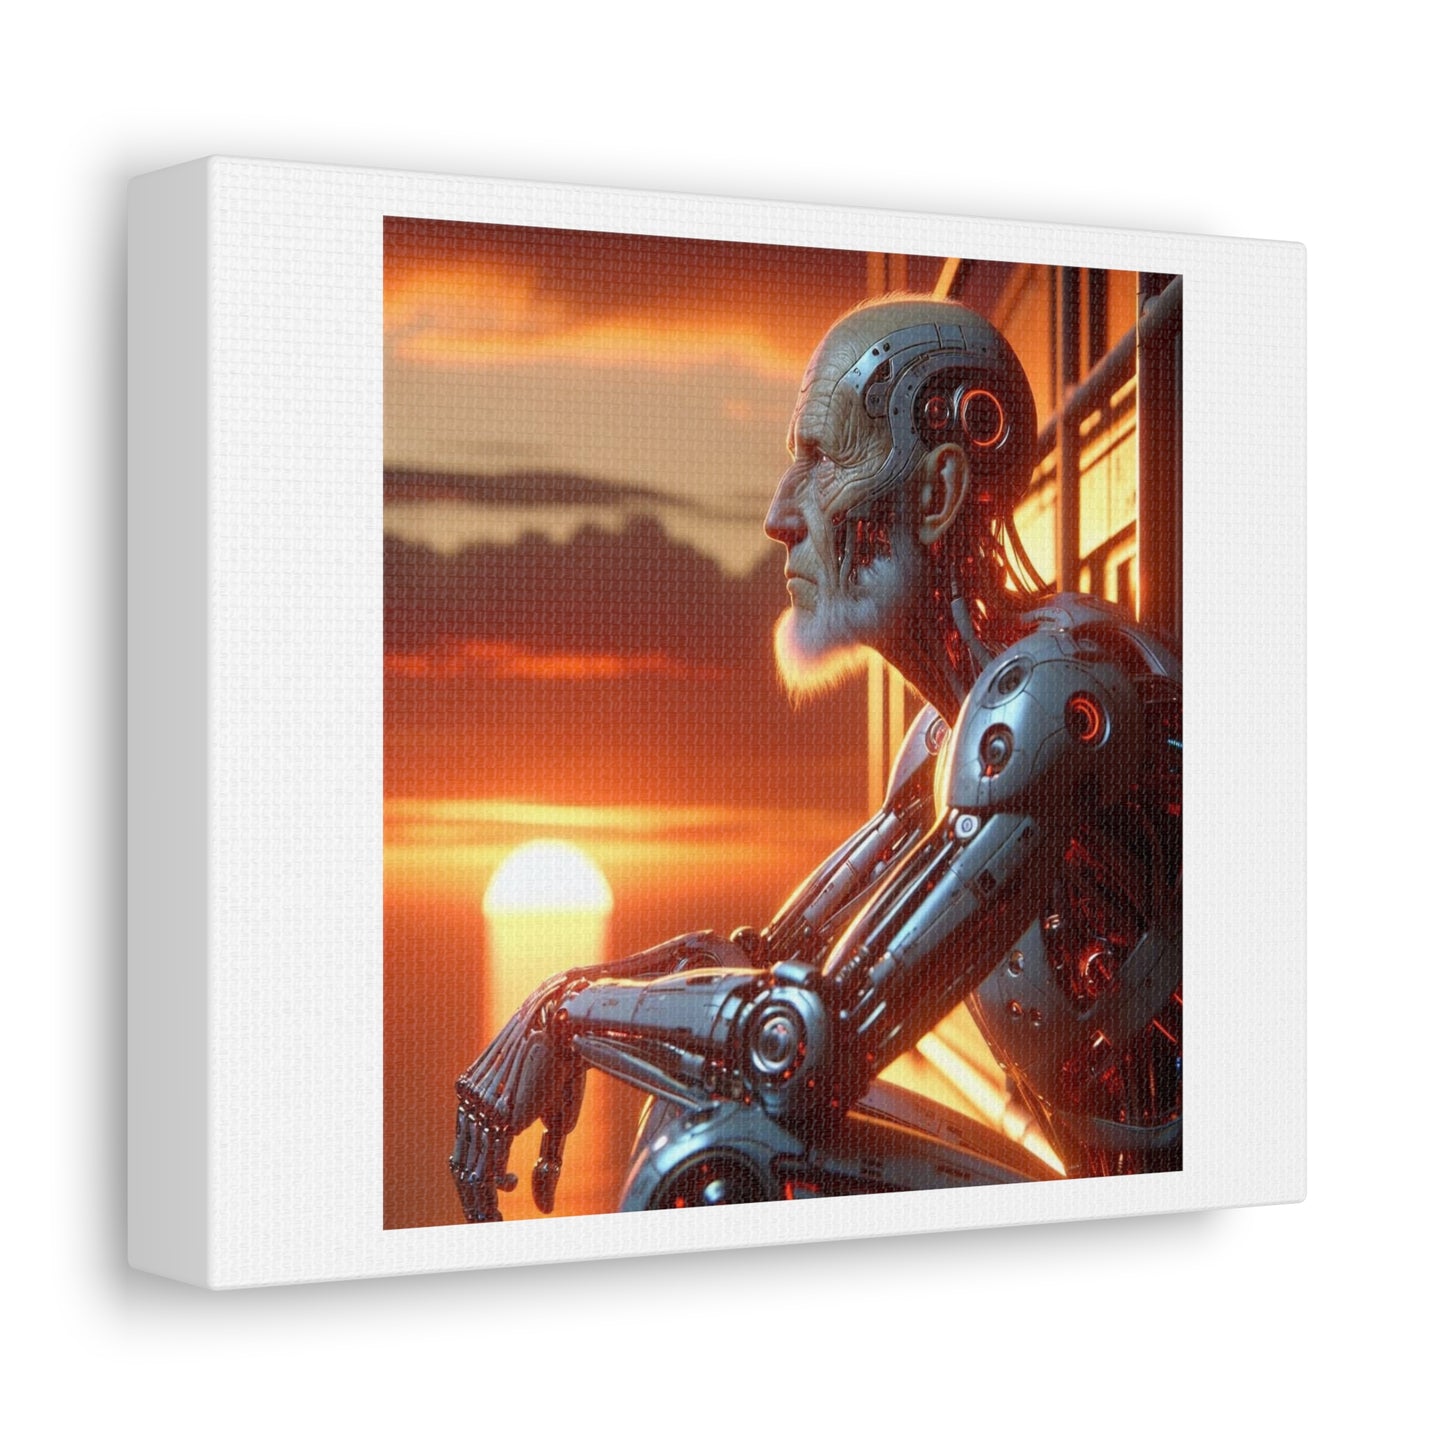 Battery Level 1% 'Designed by AI' Art Print on Canvas